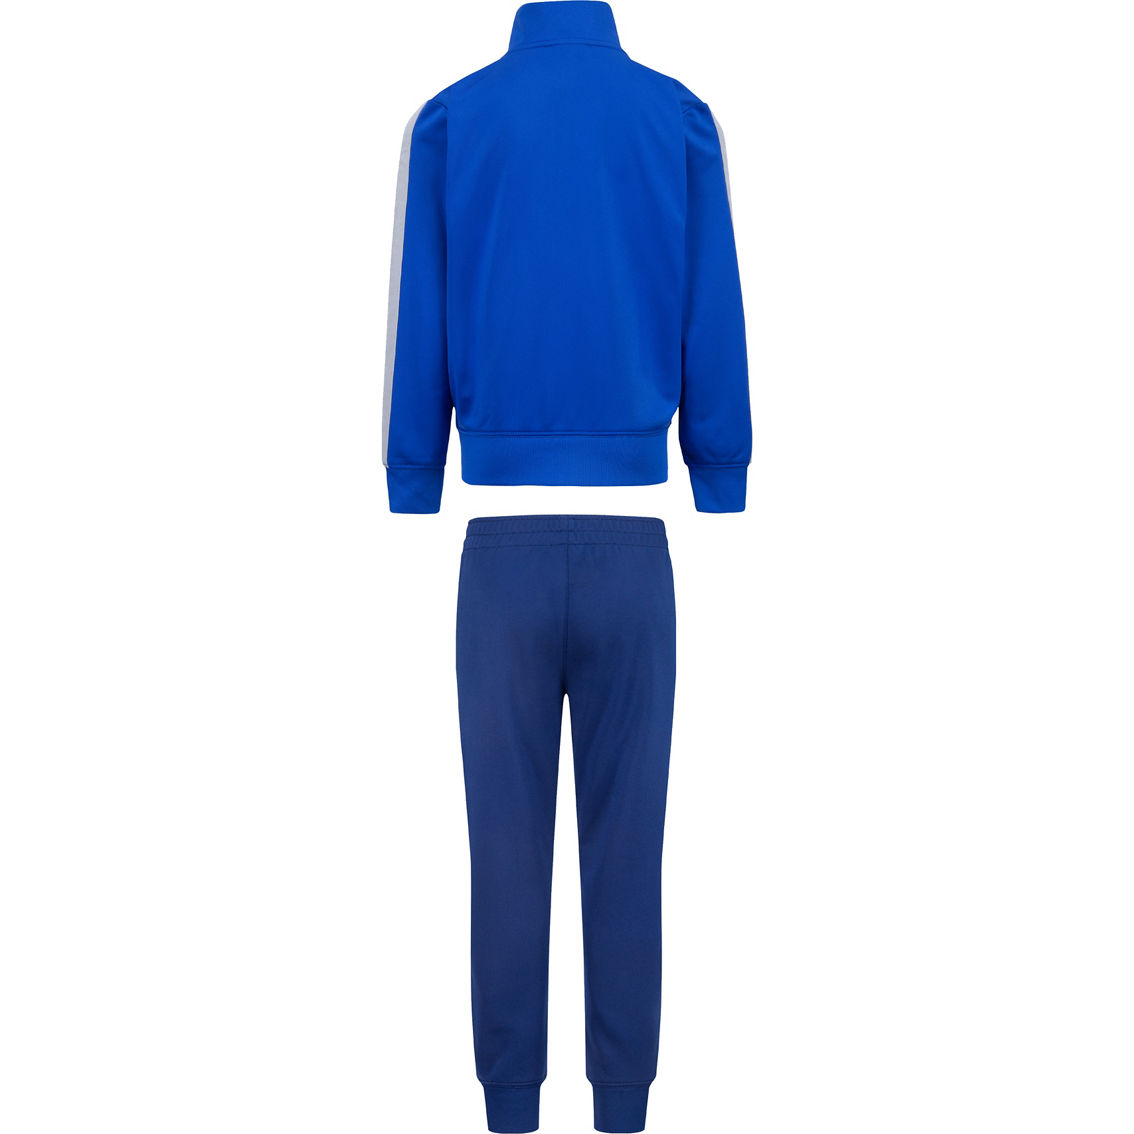 Nike Boys Cyber Tricot Jacket and Pants 2 pc. Set - Image 2 of 5